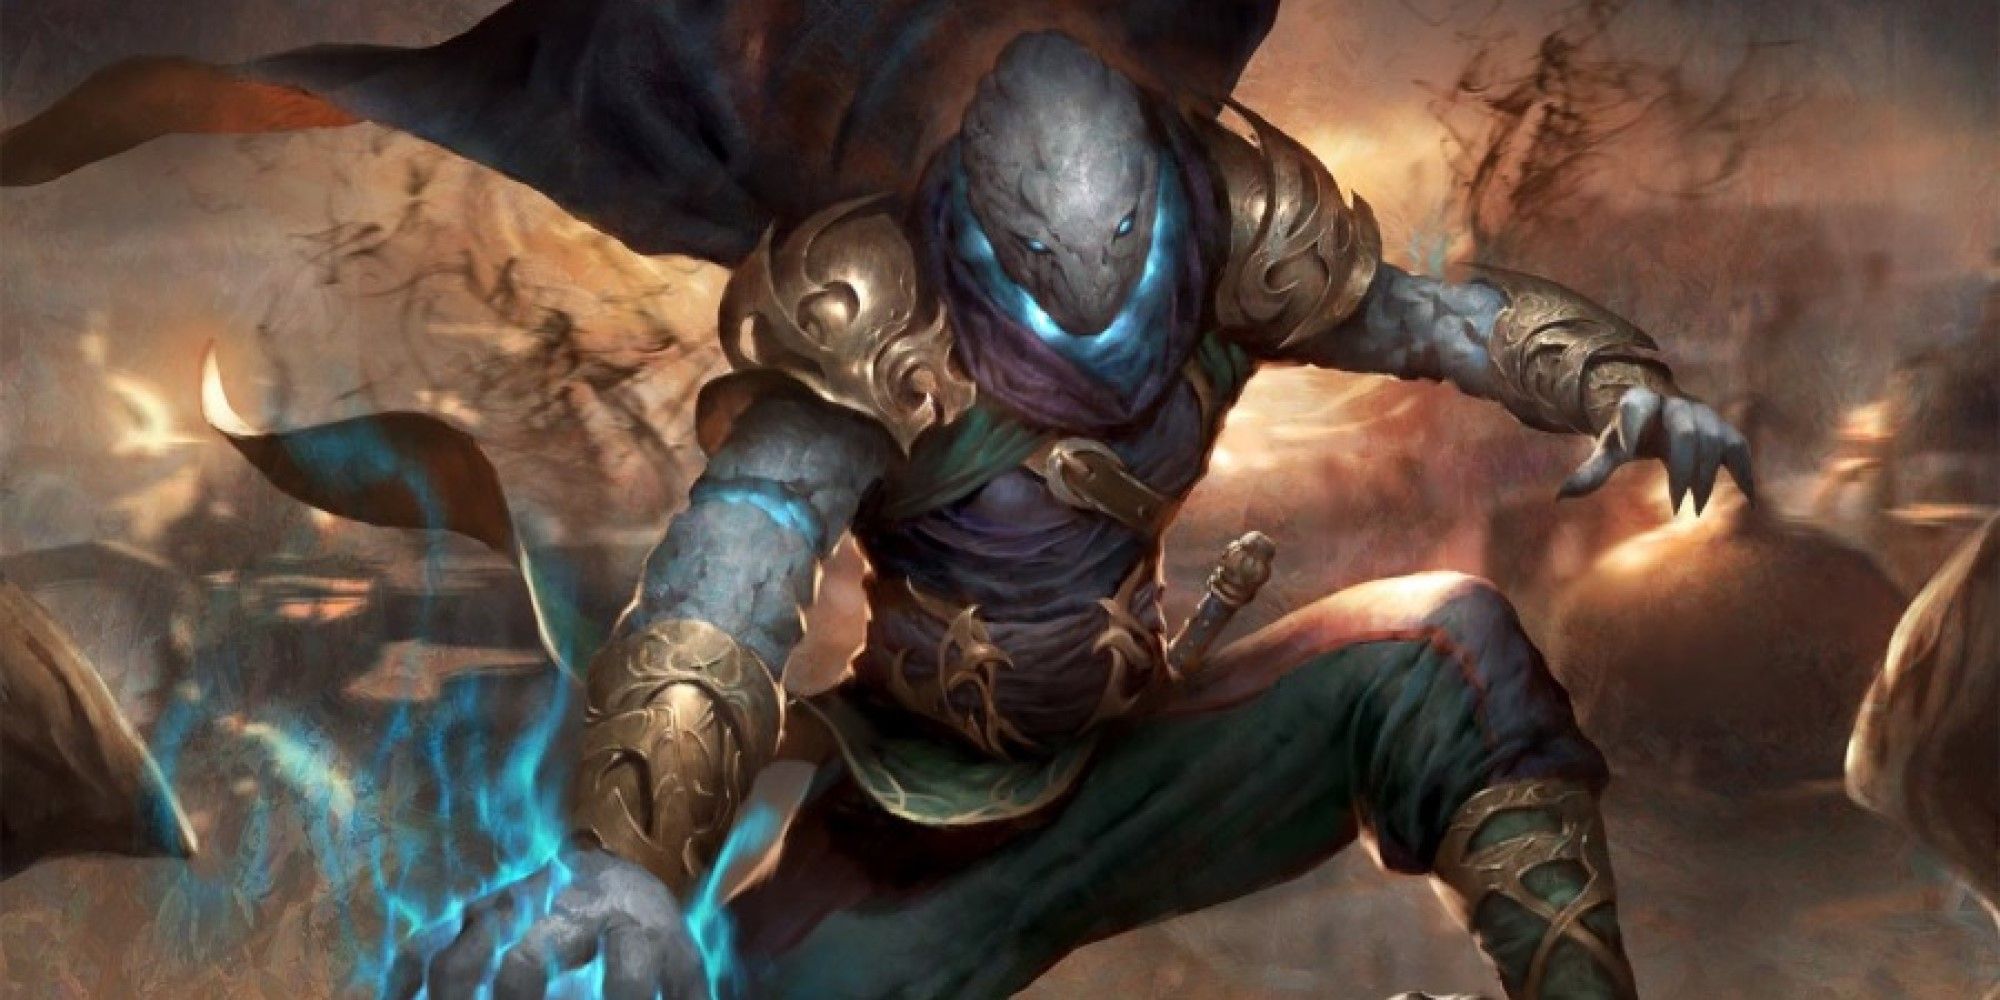 MTG Aetherborn warrior that drains the life force of a fallen enemy